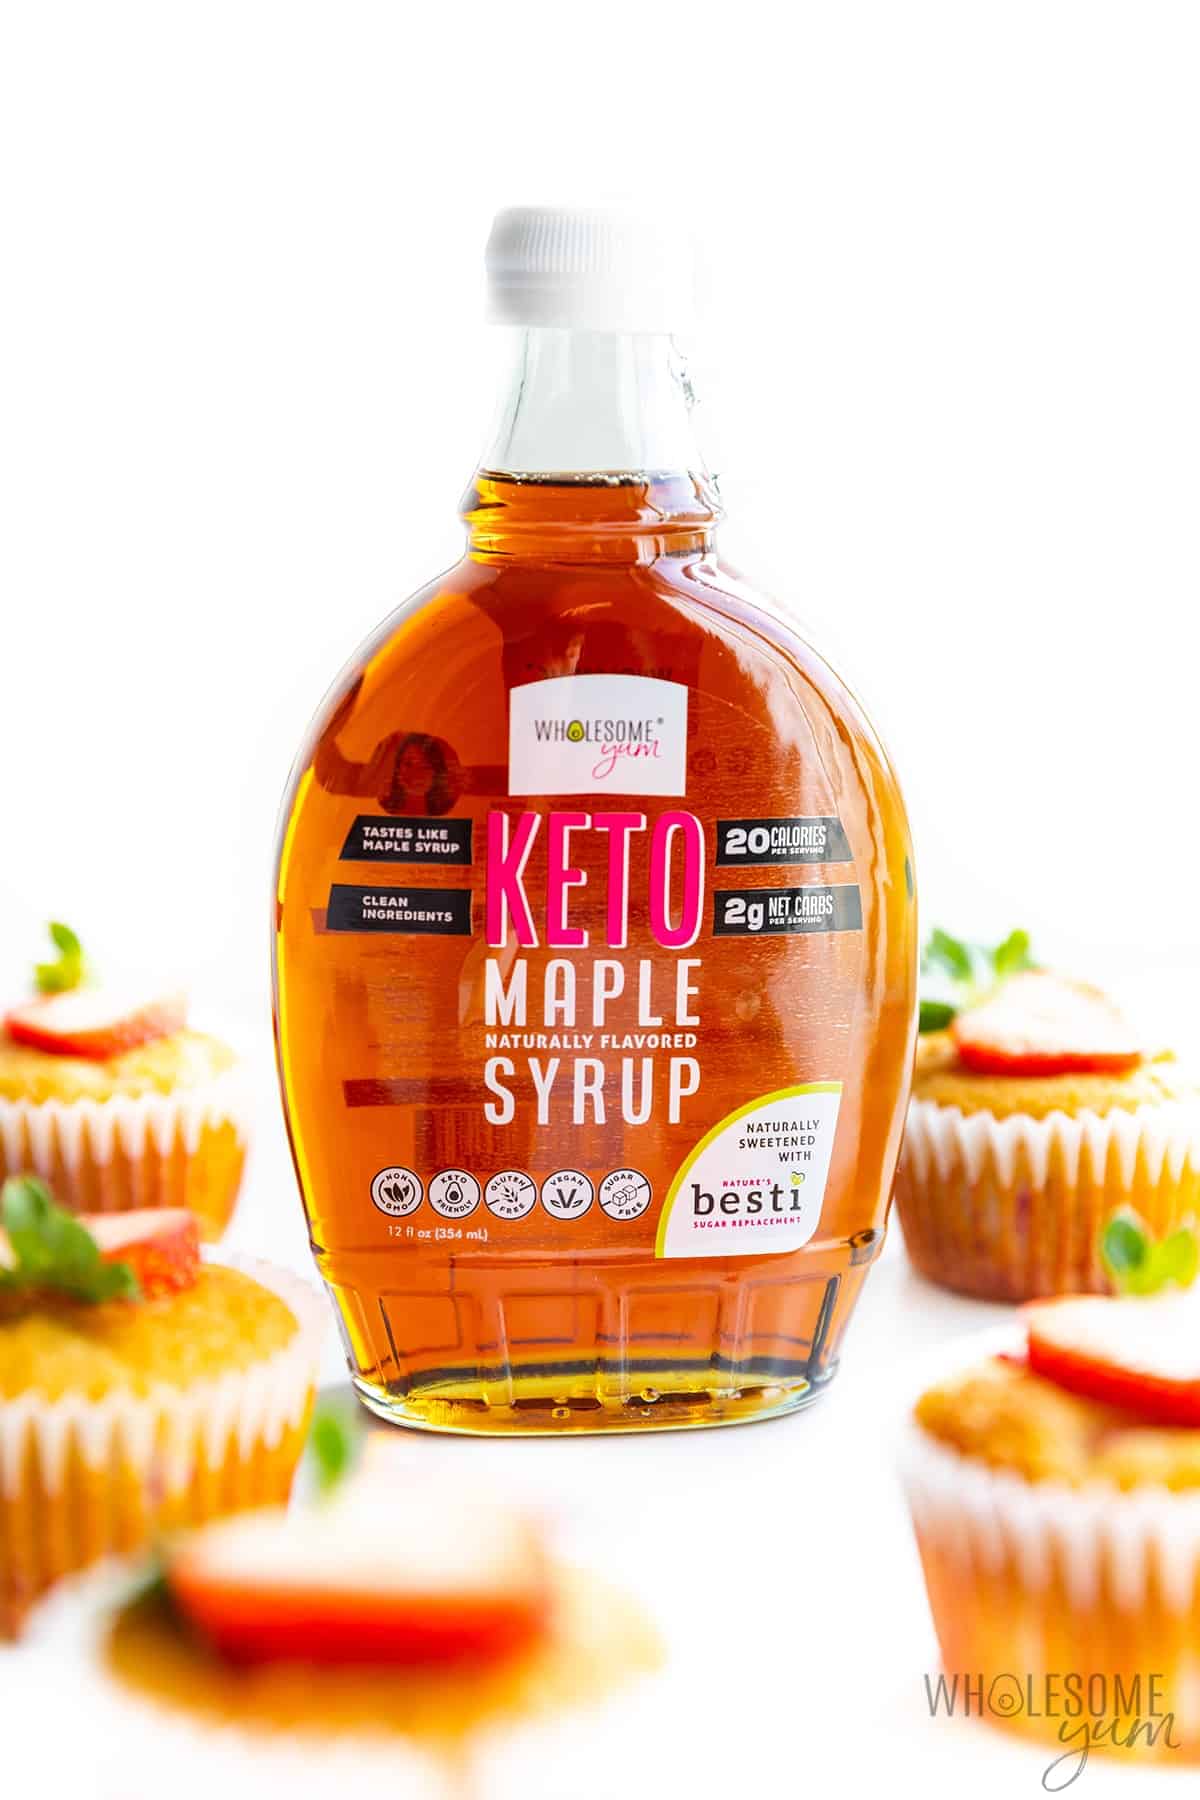 Almond flour muffins with a bottle of Wholesome Yum Keto Maple Syrup.